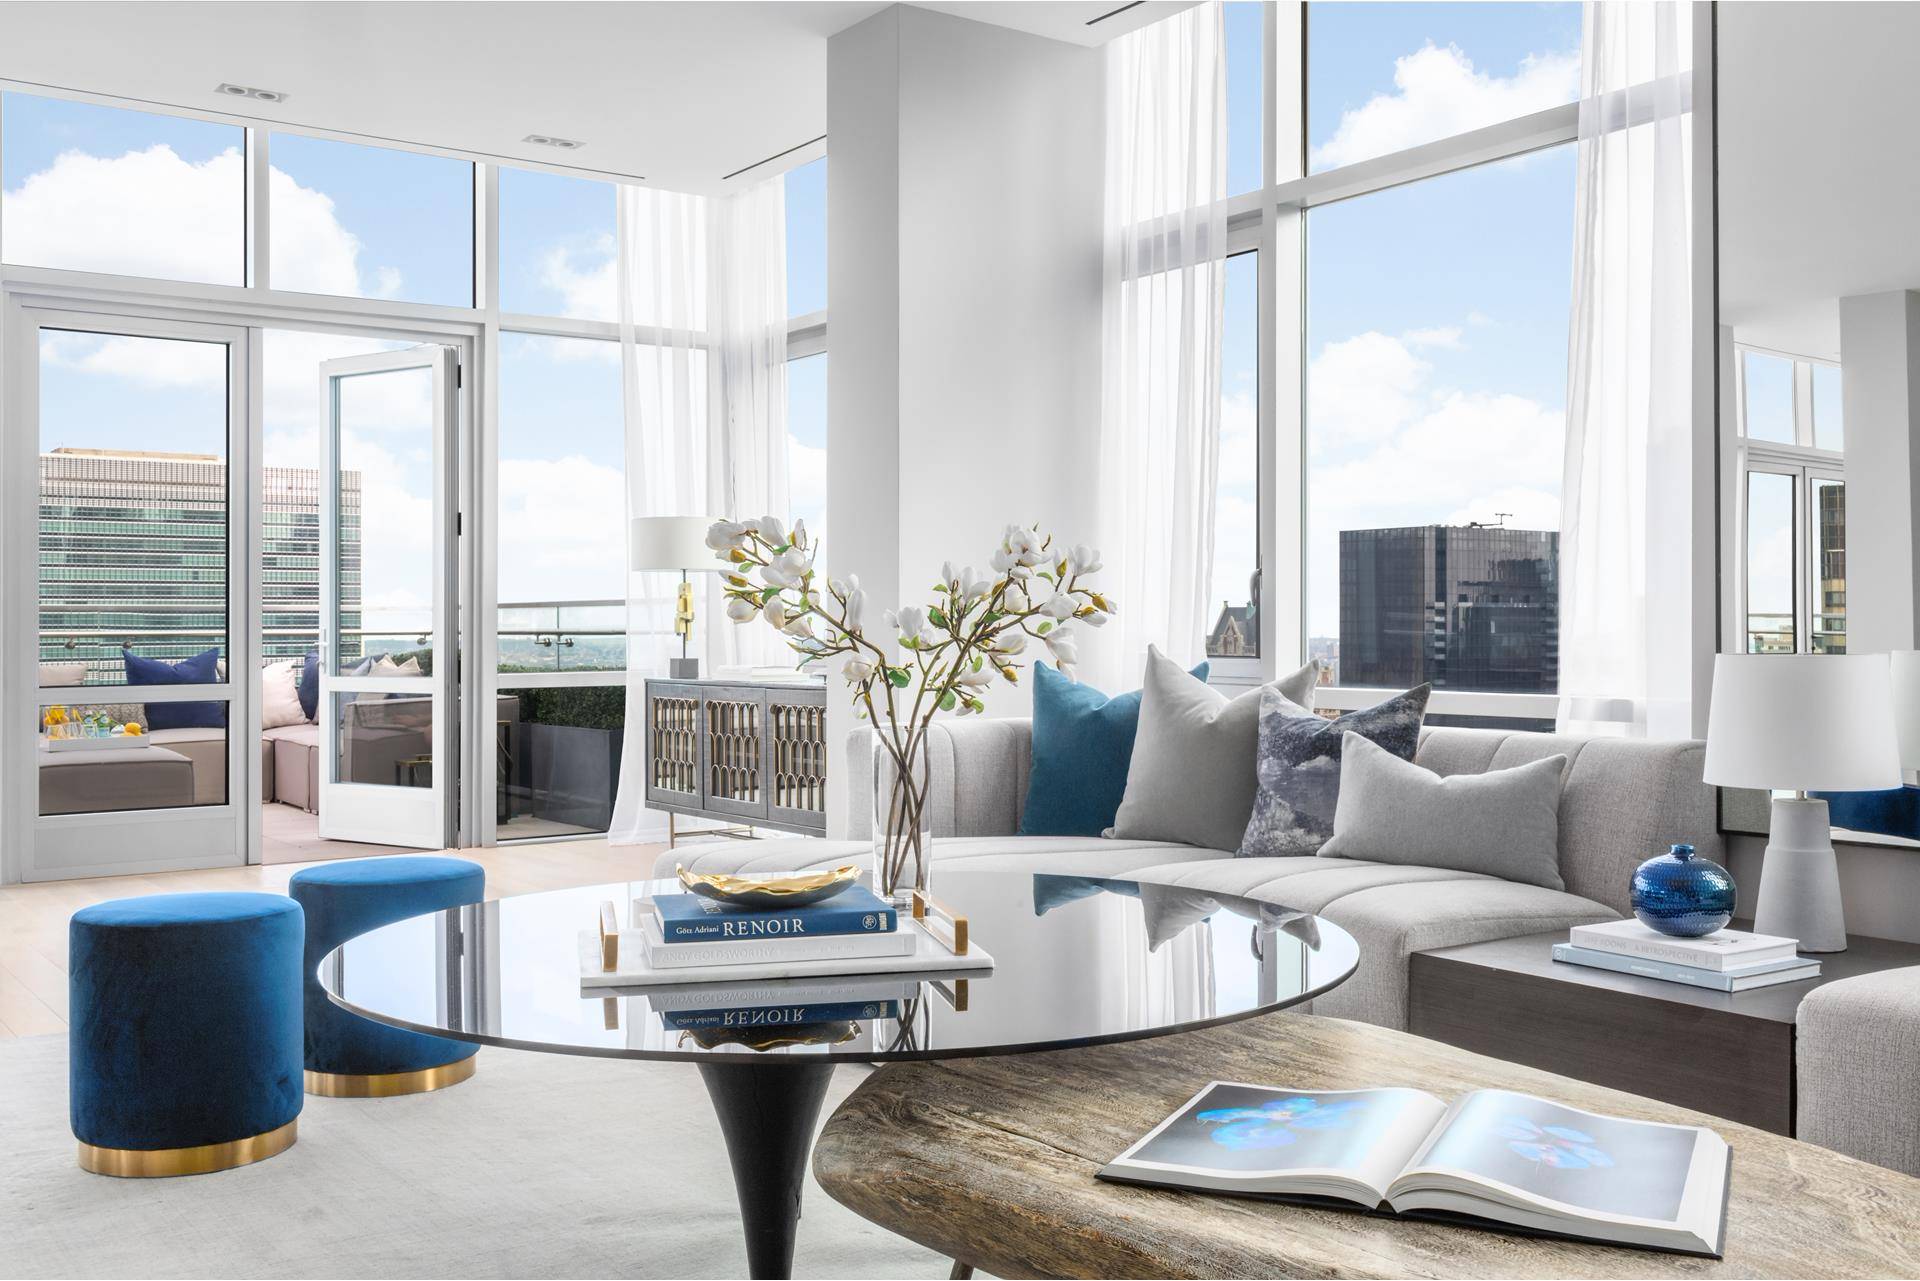 Introducing an extraordinary penthouse at 219 East 44th Street designed by Pembroke and Ives.